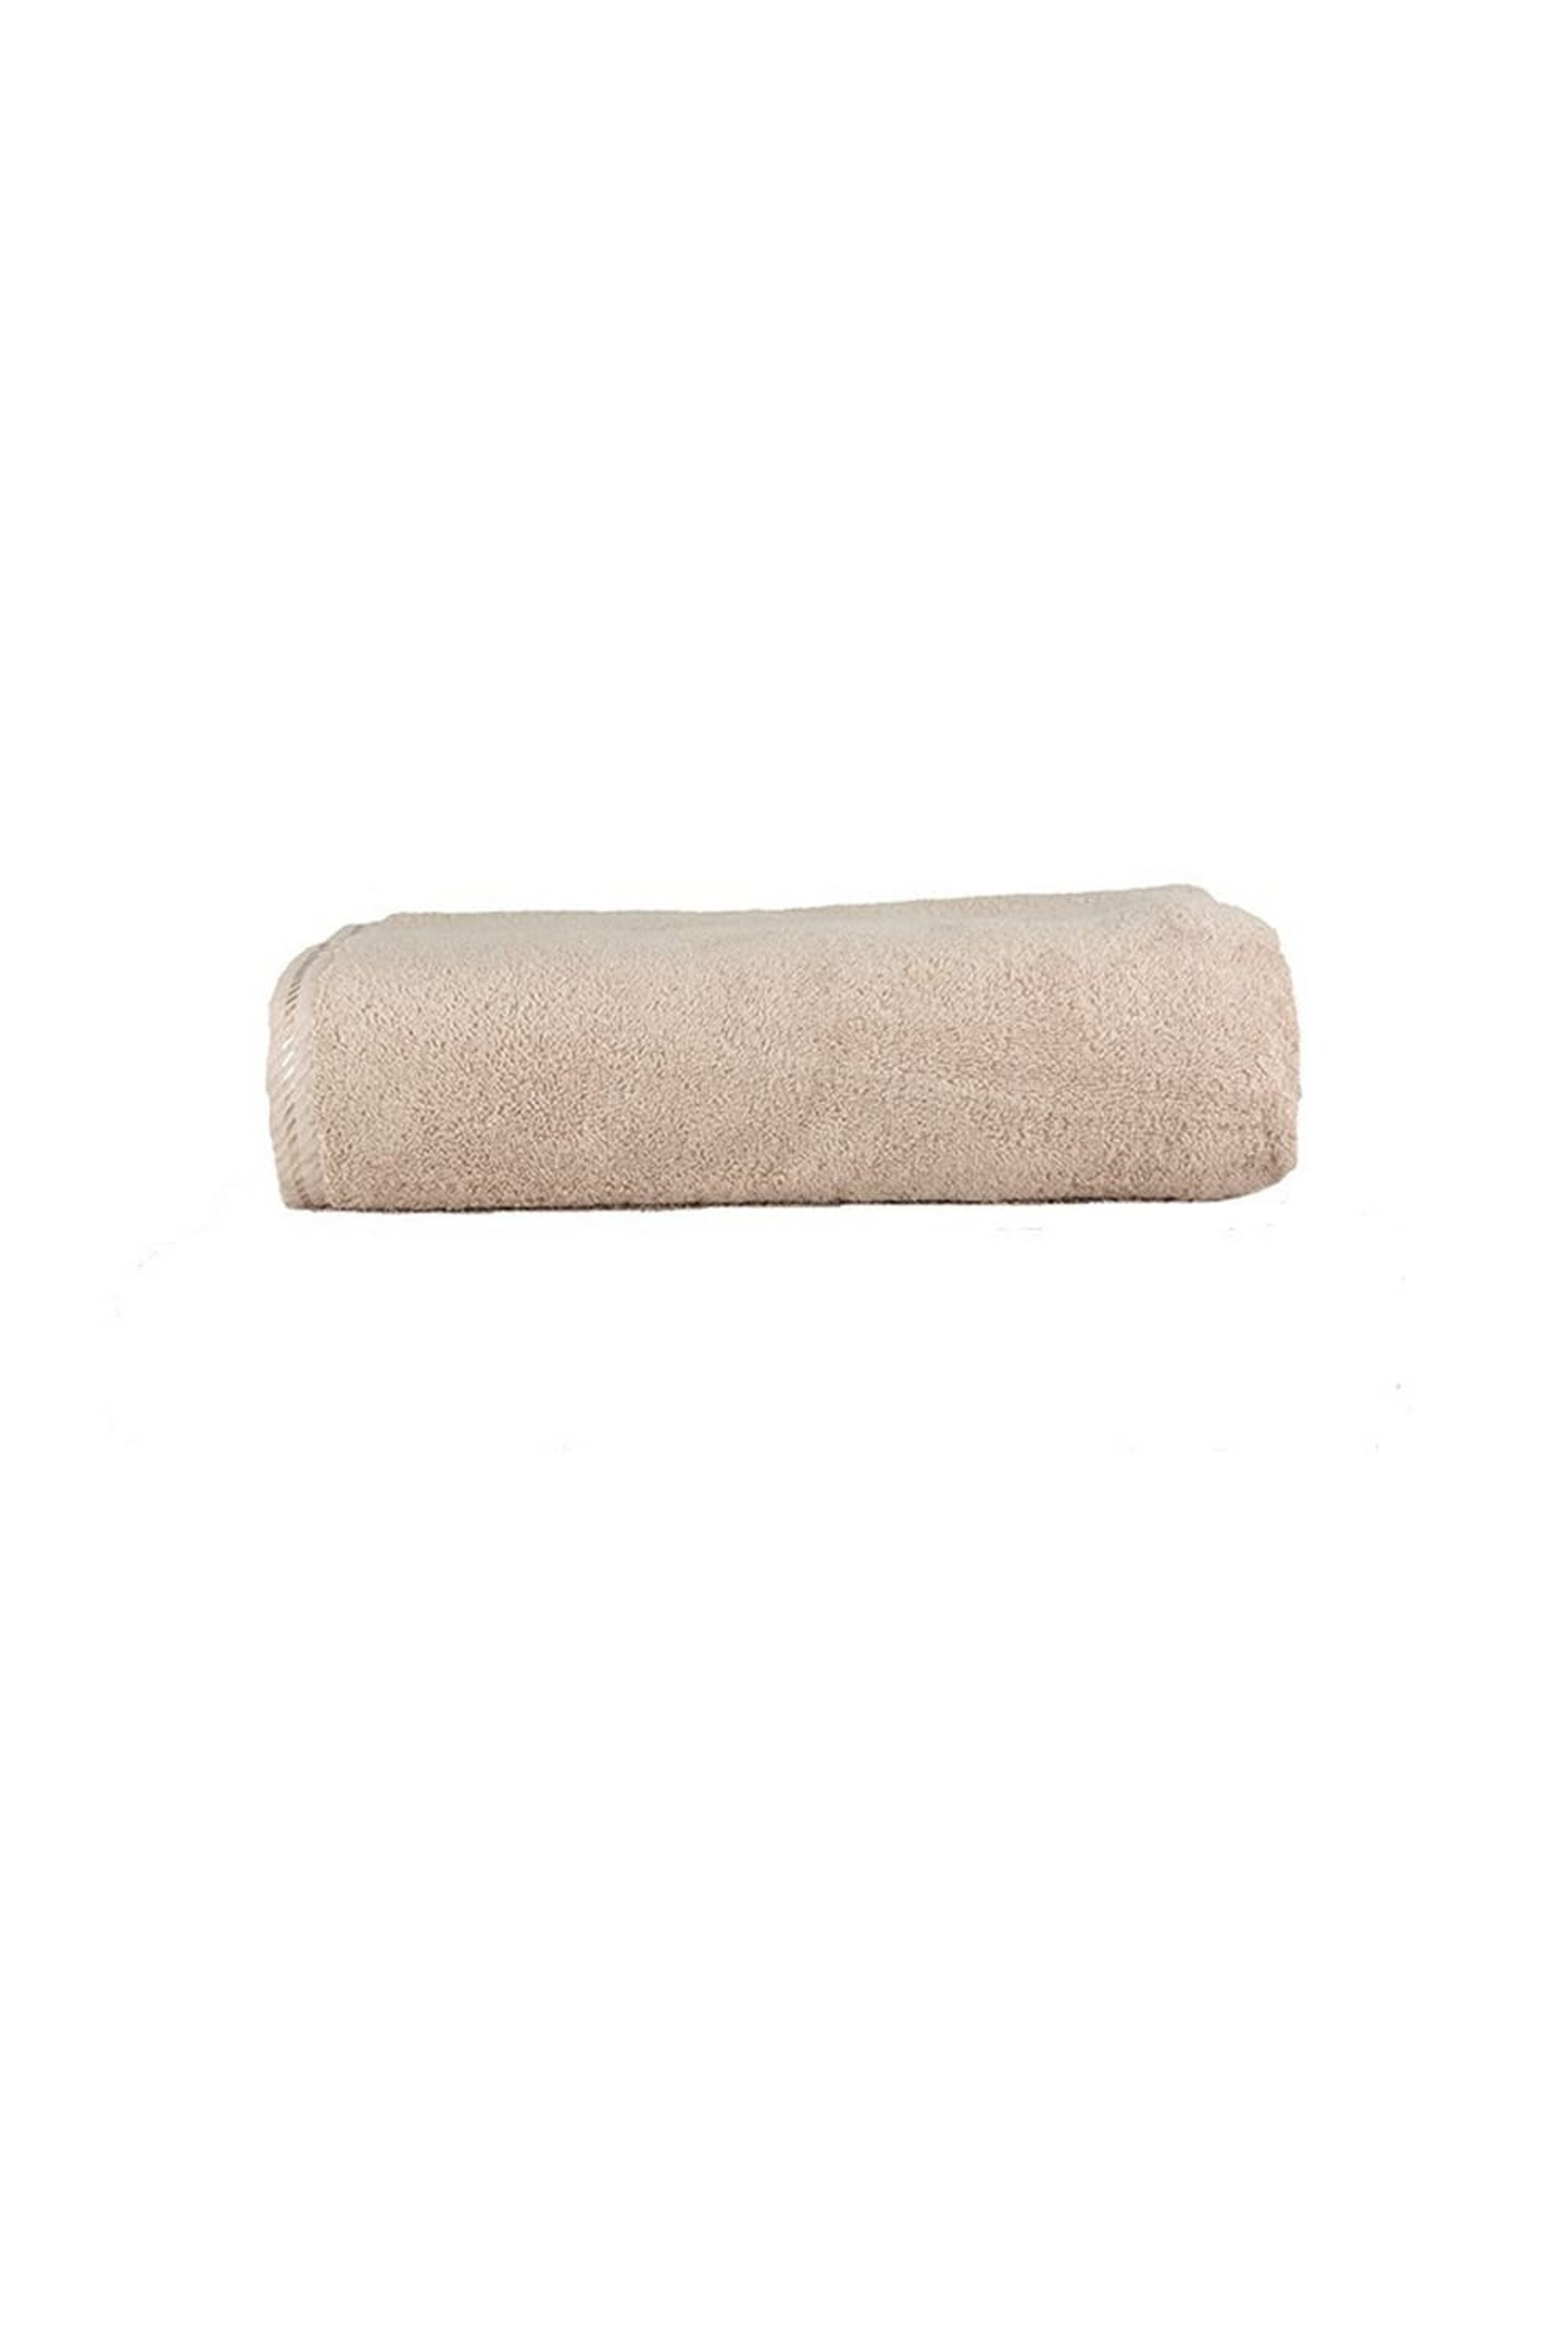 A&R TOWELS A&R TOWELS A&R TOWELS ULTRA SOFT BATH TOWEL (SAND) (ONE SIZE)